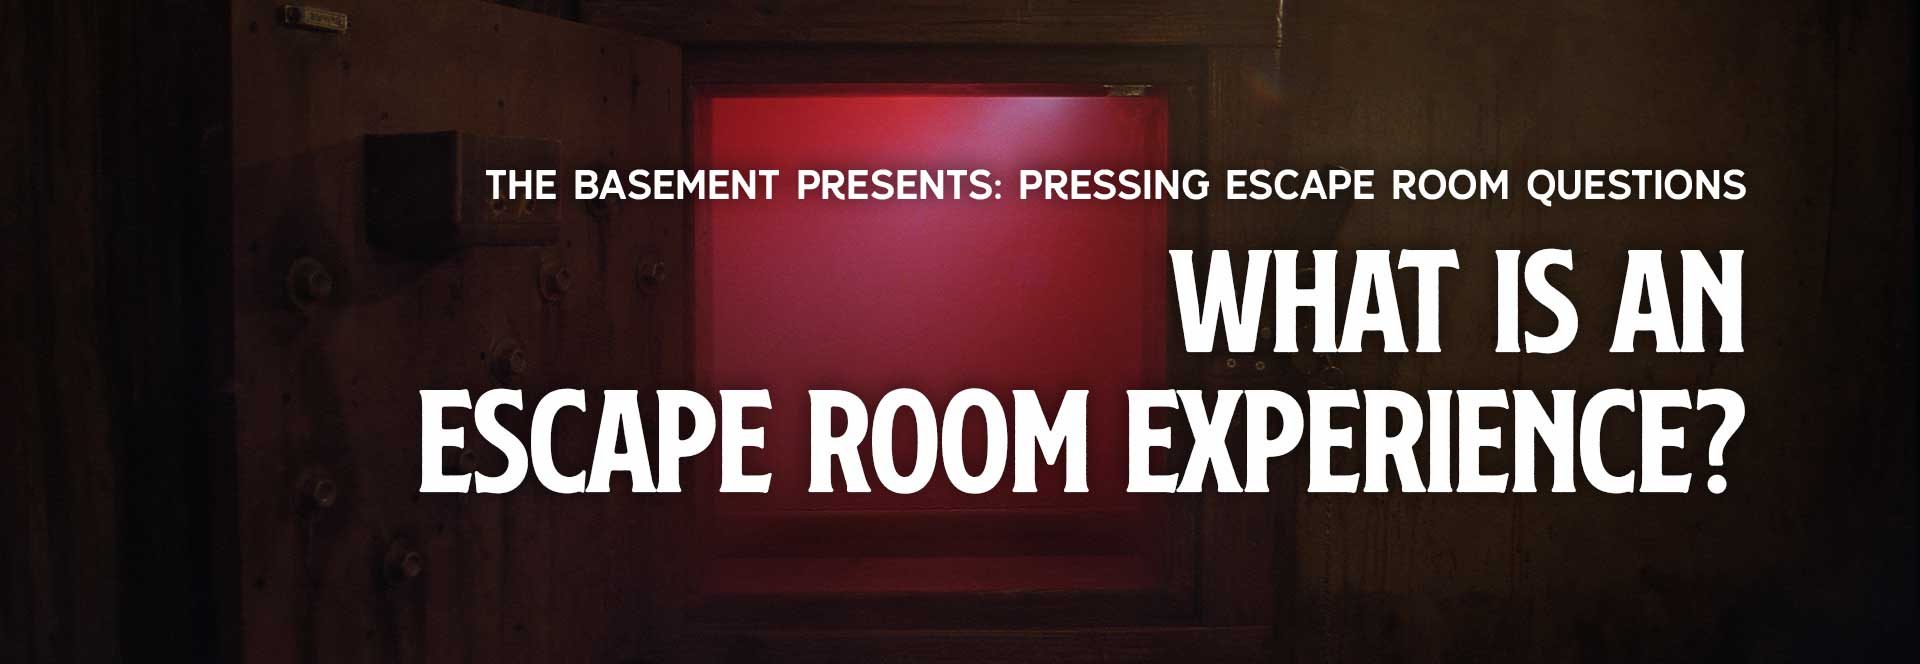 What is an escape room experience?